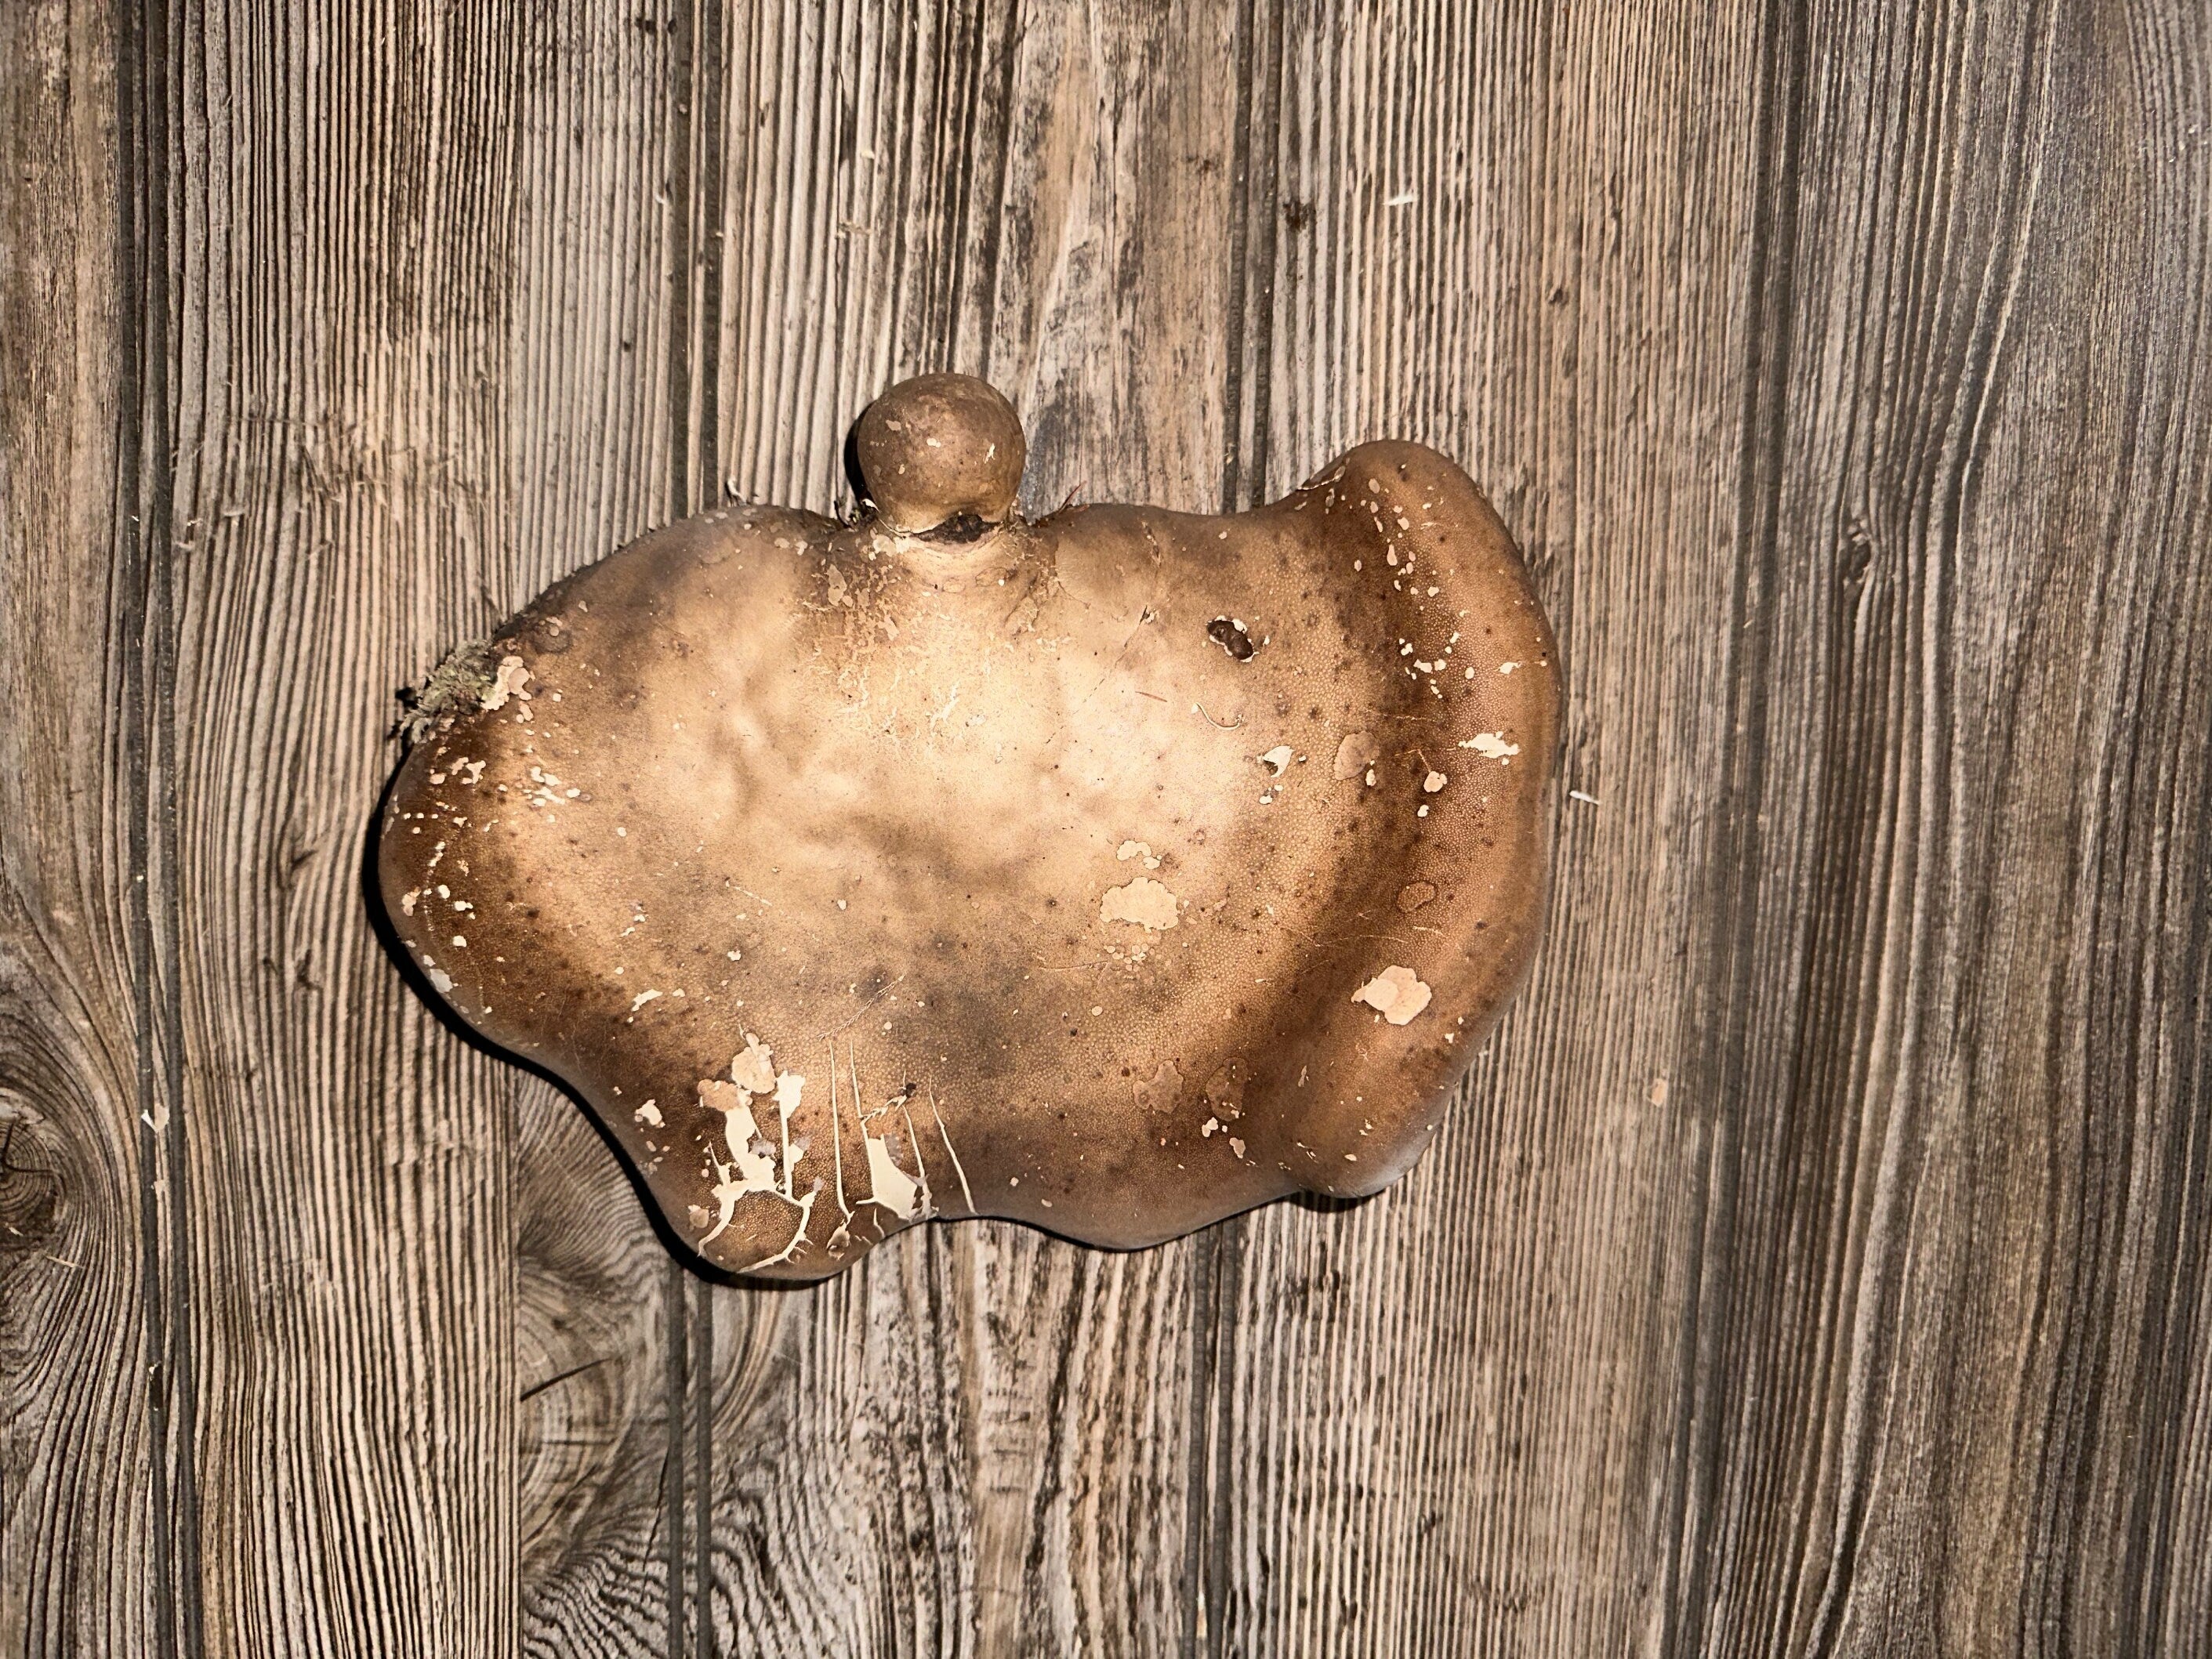 Mushroom, Polypore, Conk, Saddle Shaped, Approximately 8 Inches Long by 6 Inches Wide and 1.5 Inches Tall